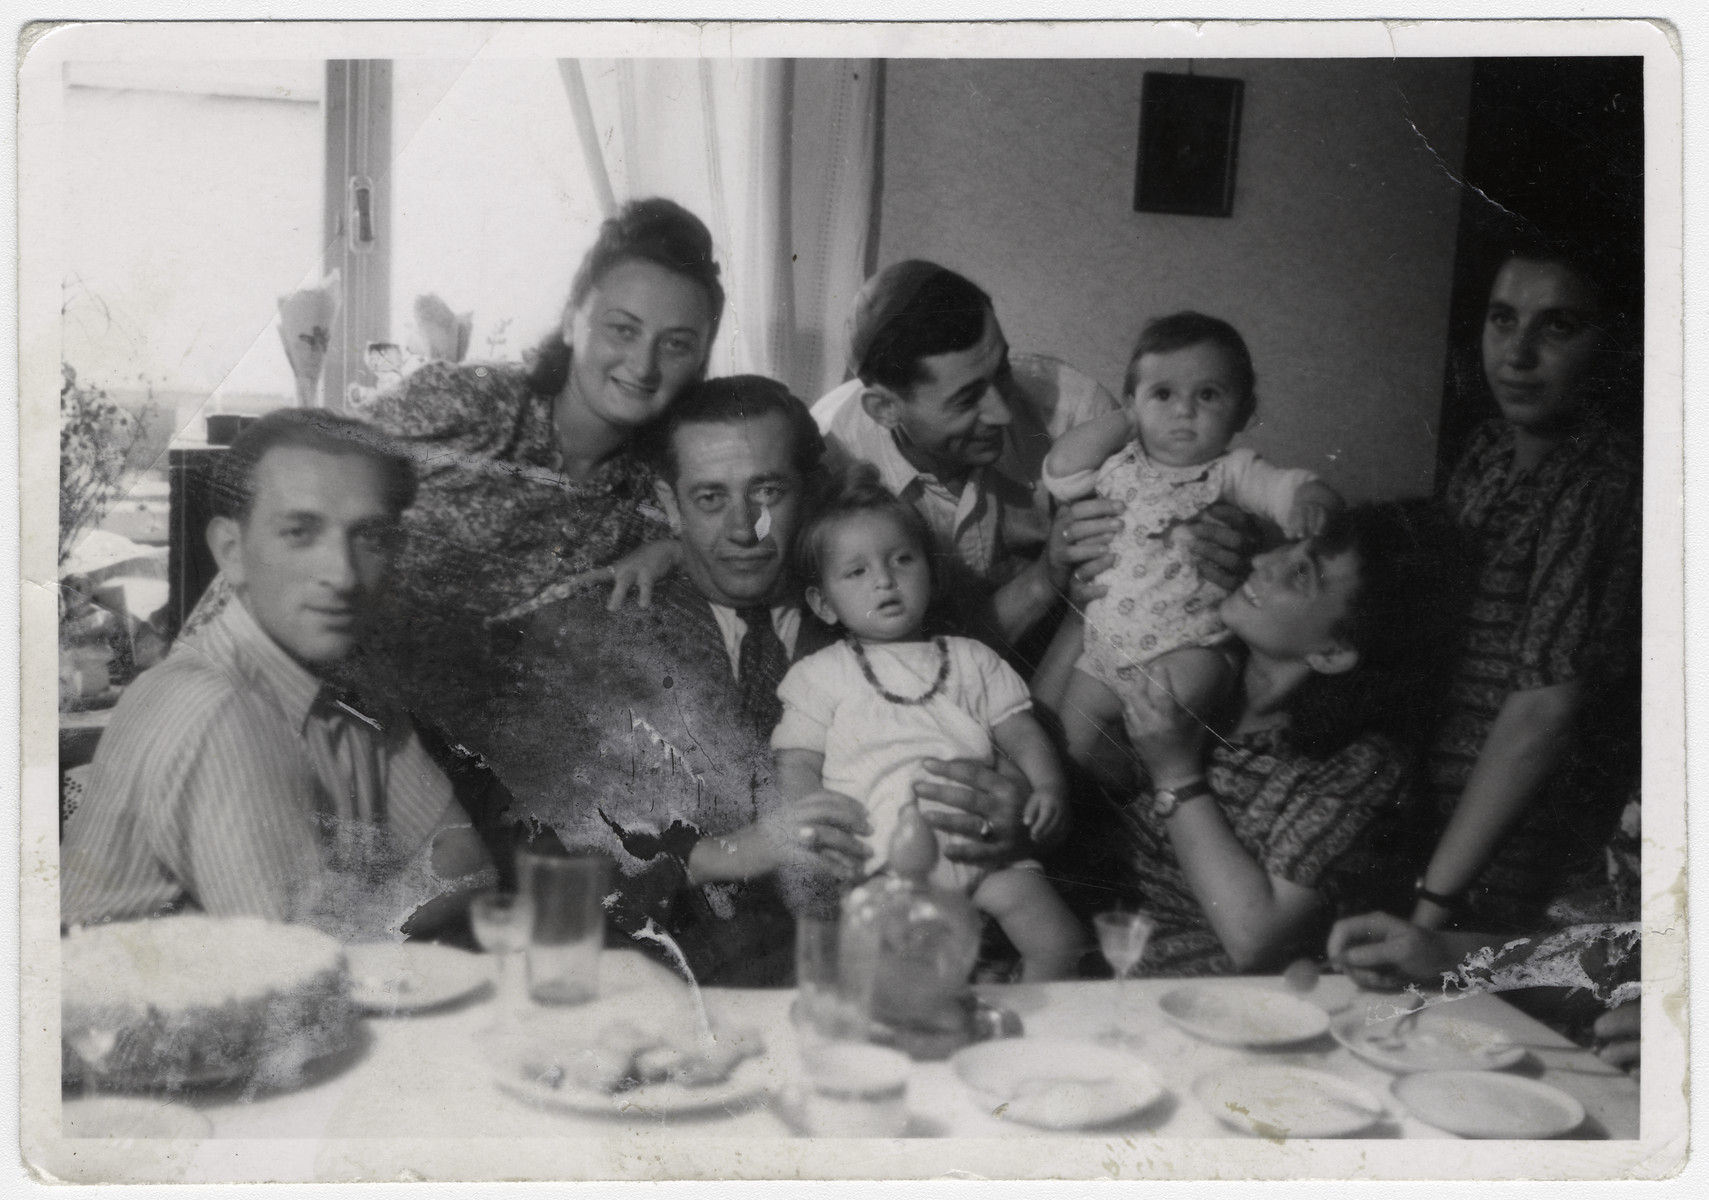 Men and women gather around a table for a celebration in the Bergen-Belsen displaced persons camp.

Left to right (sitting): The second gentleman holding the baby is Elias Rosengarten